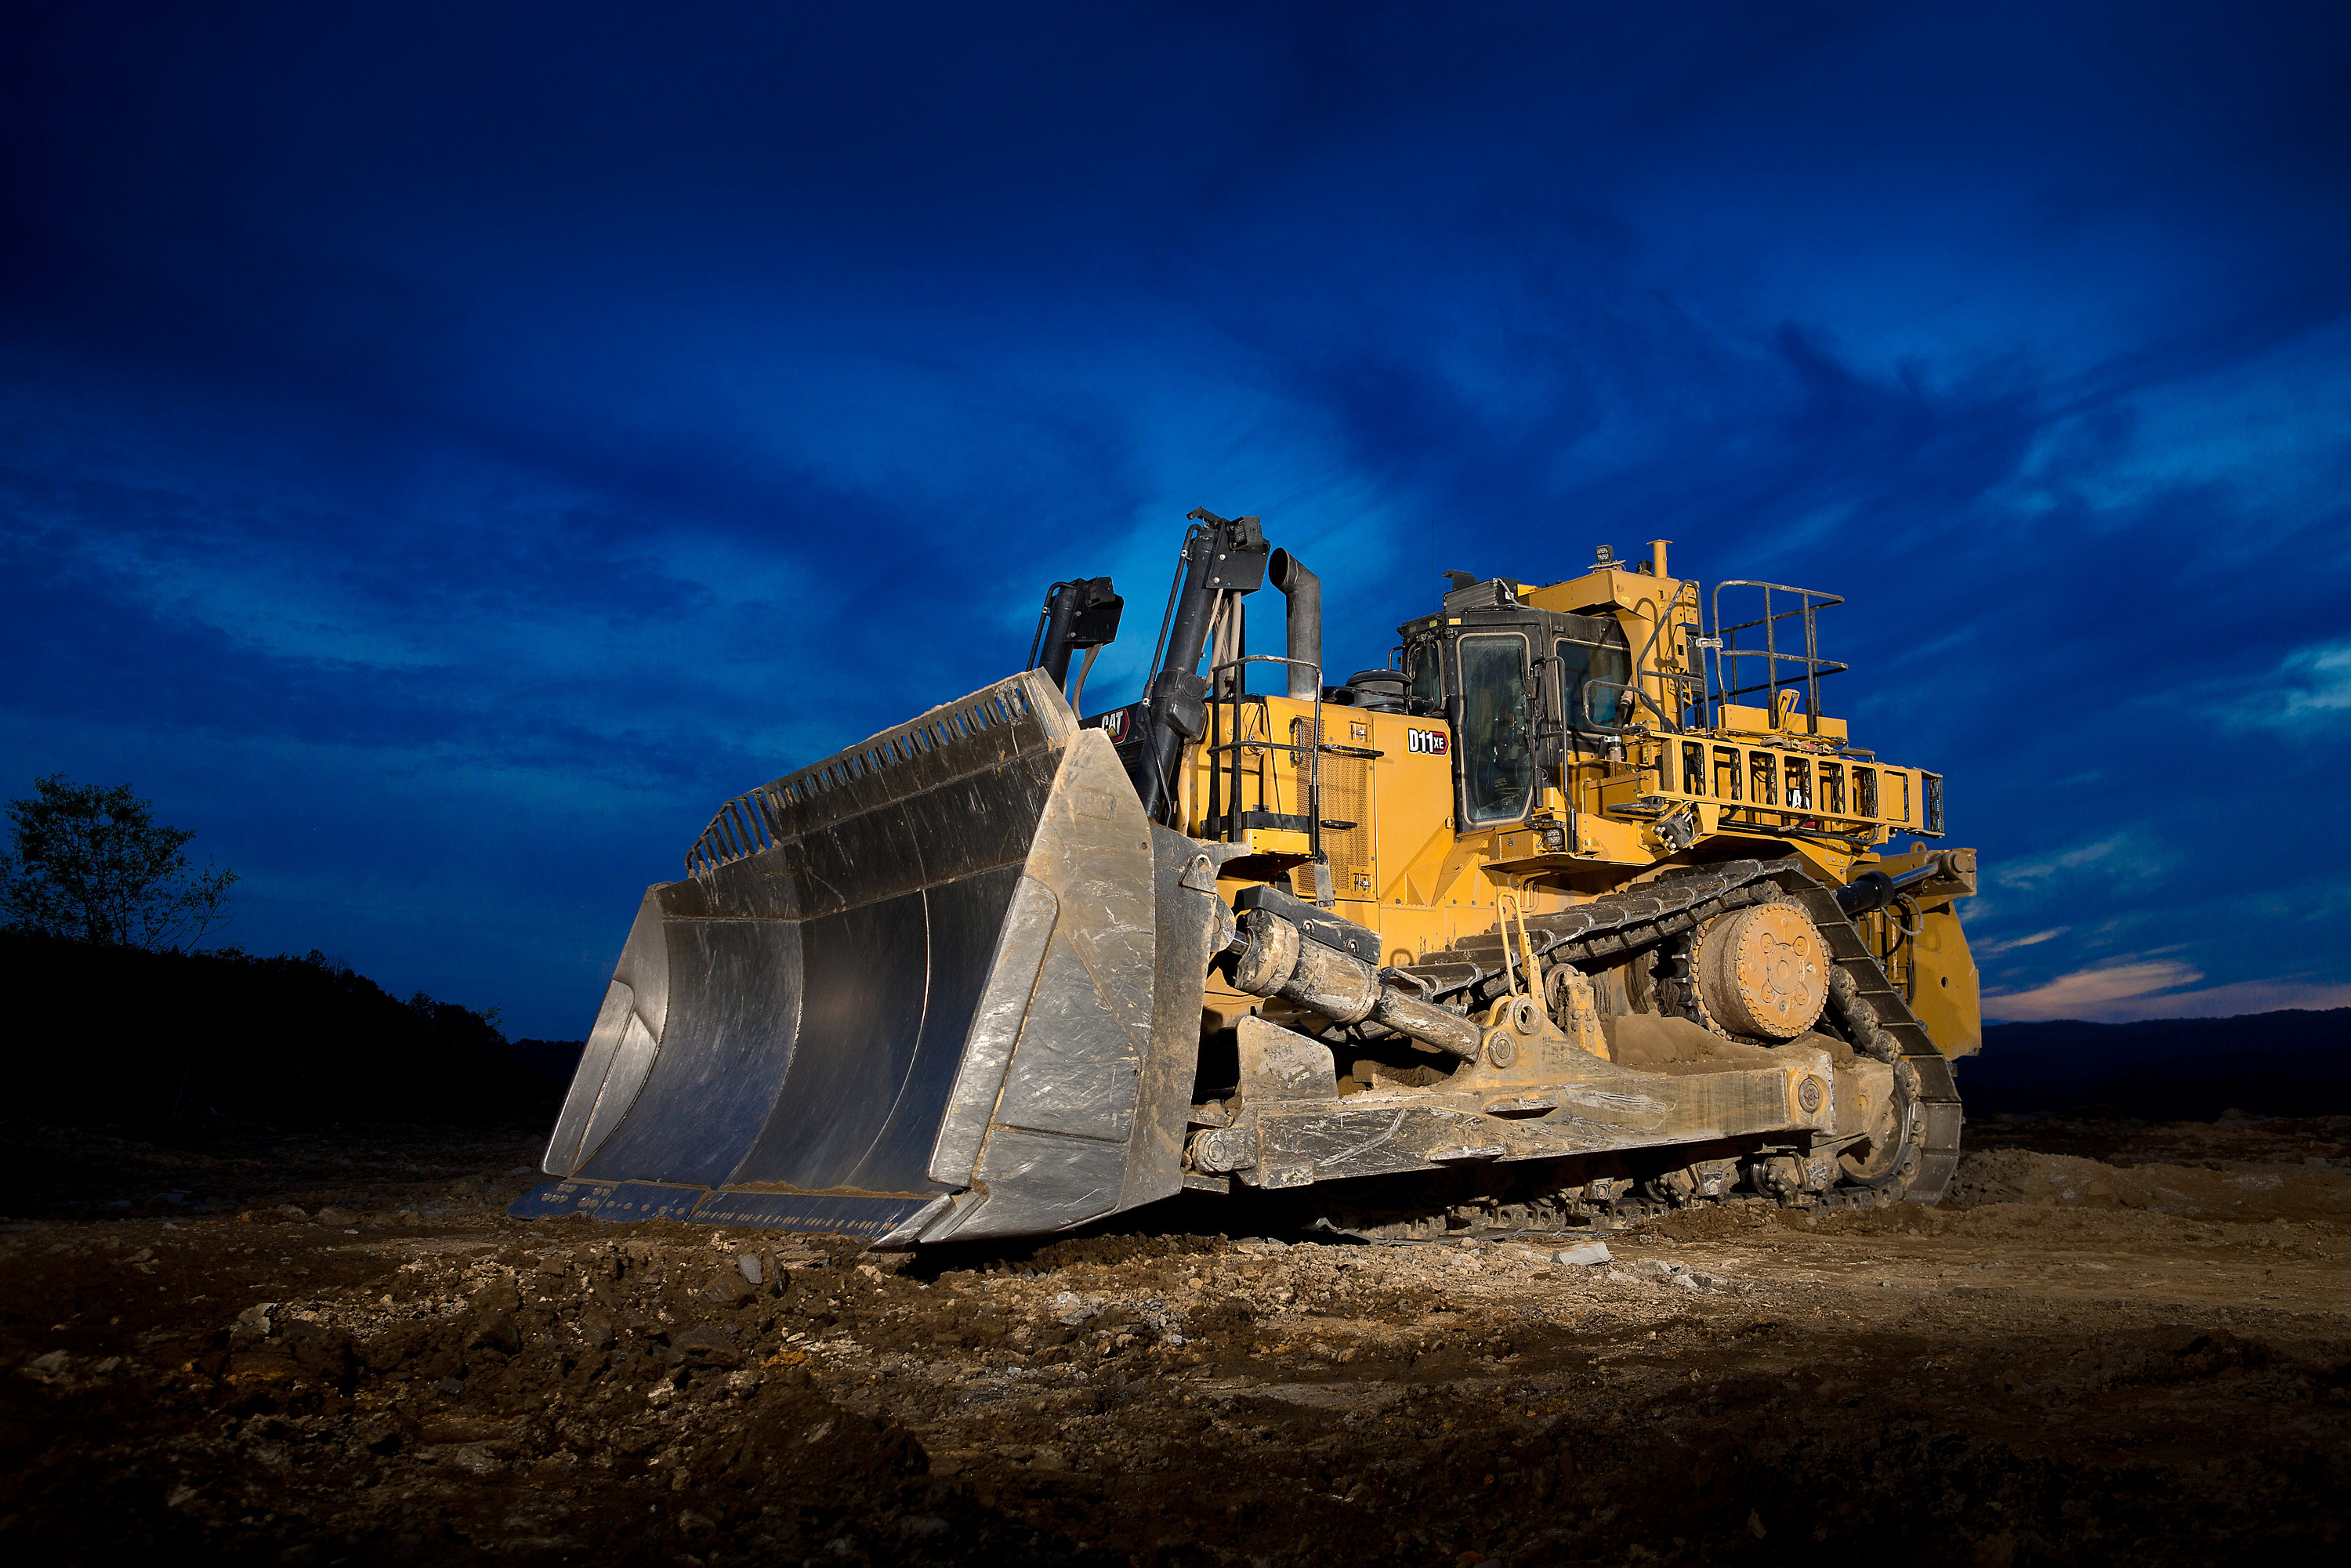 The Cat® D11 XE harnesses the power and efficiency of electric drive to  deliver the lowest cost per ton in dozing applications